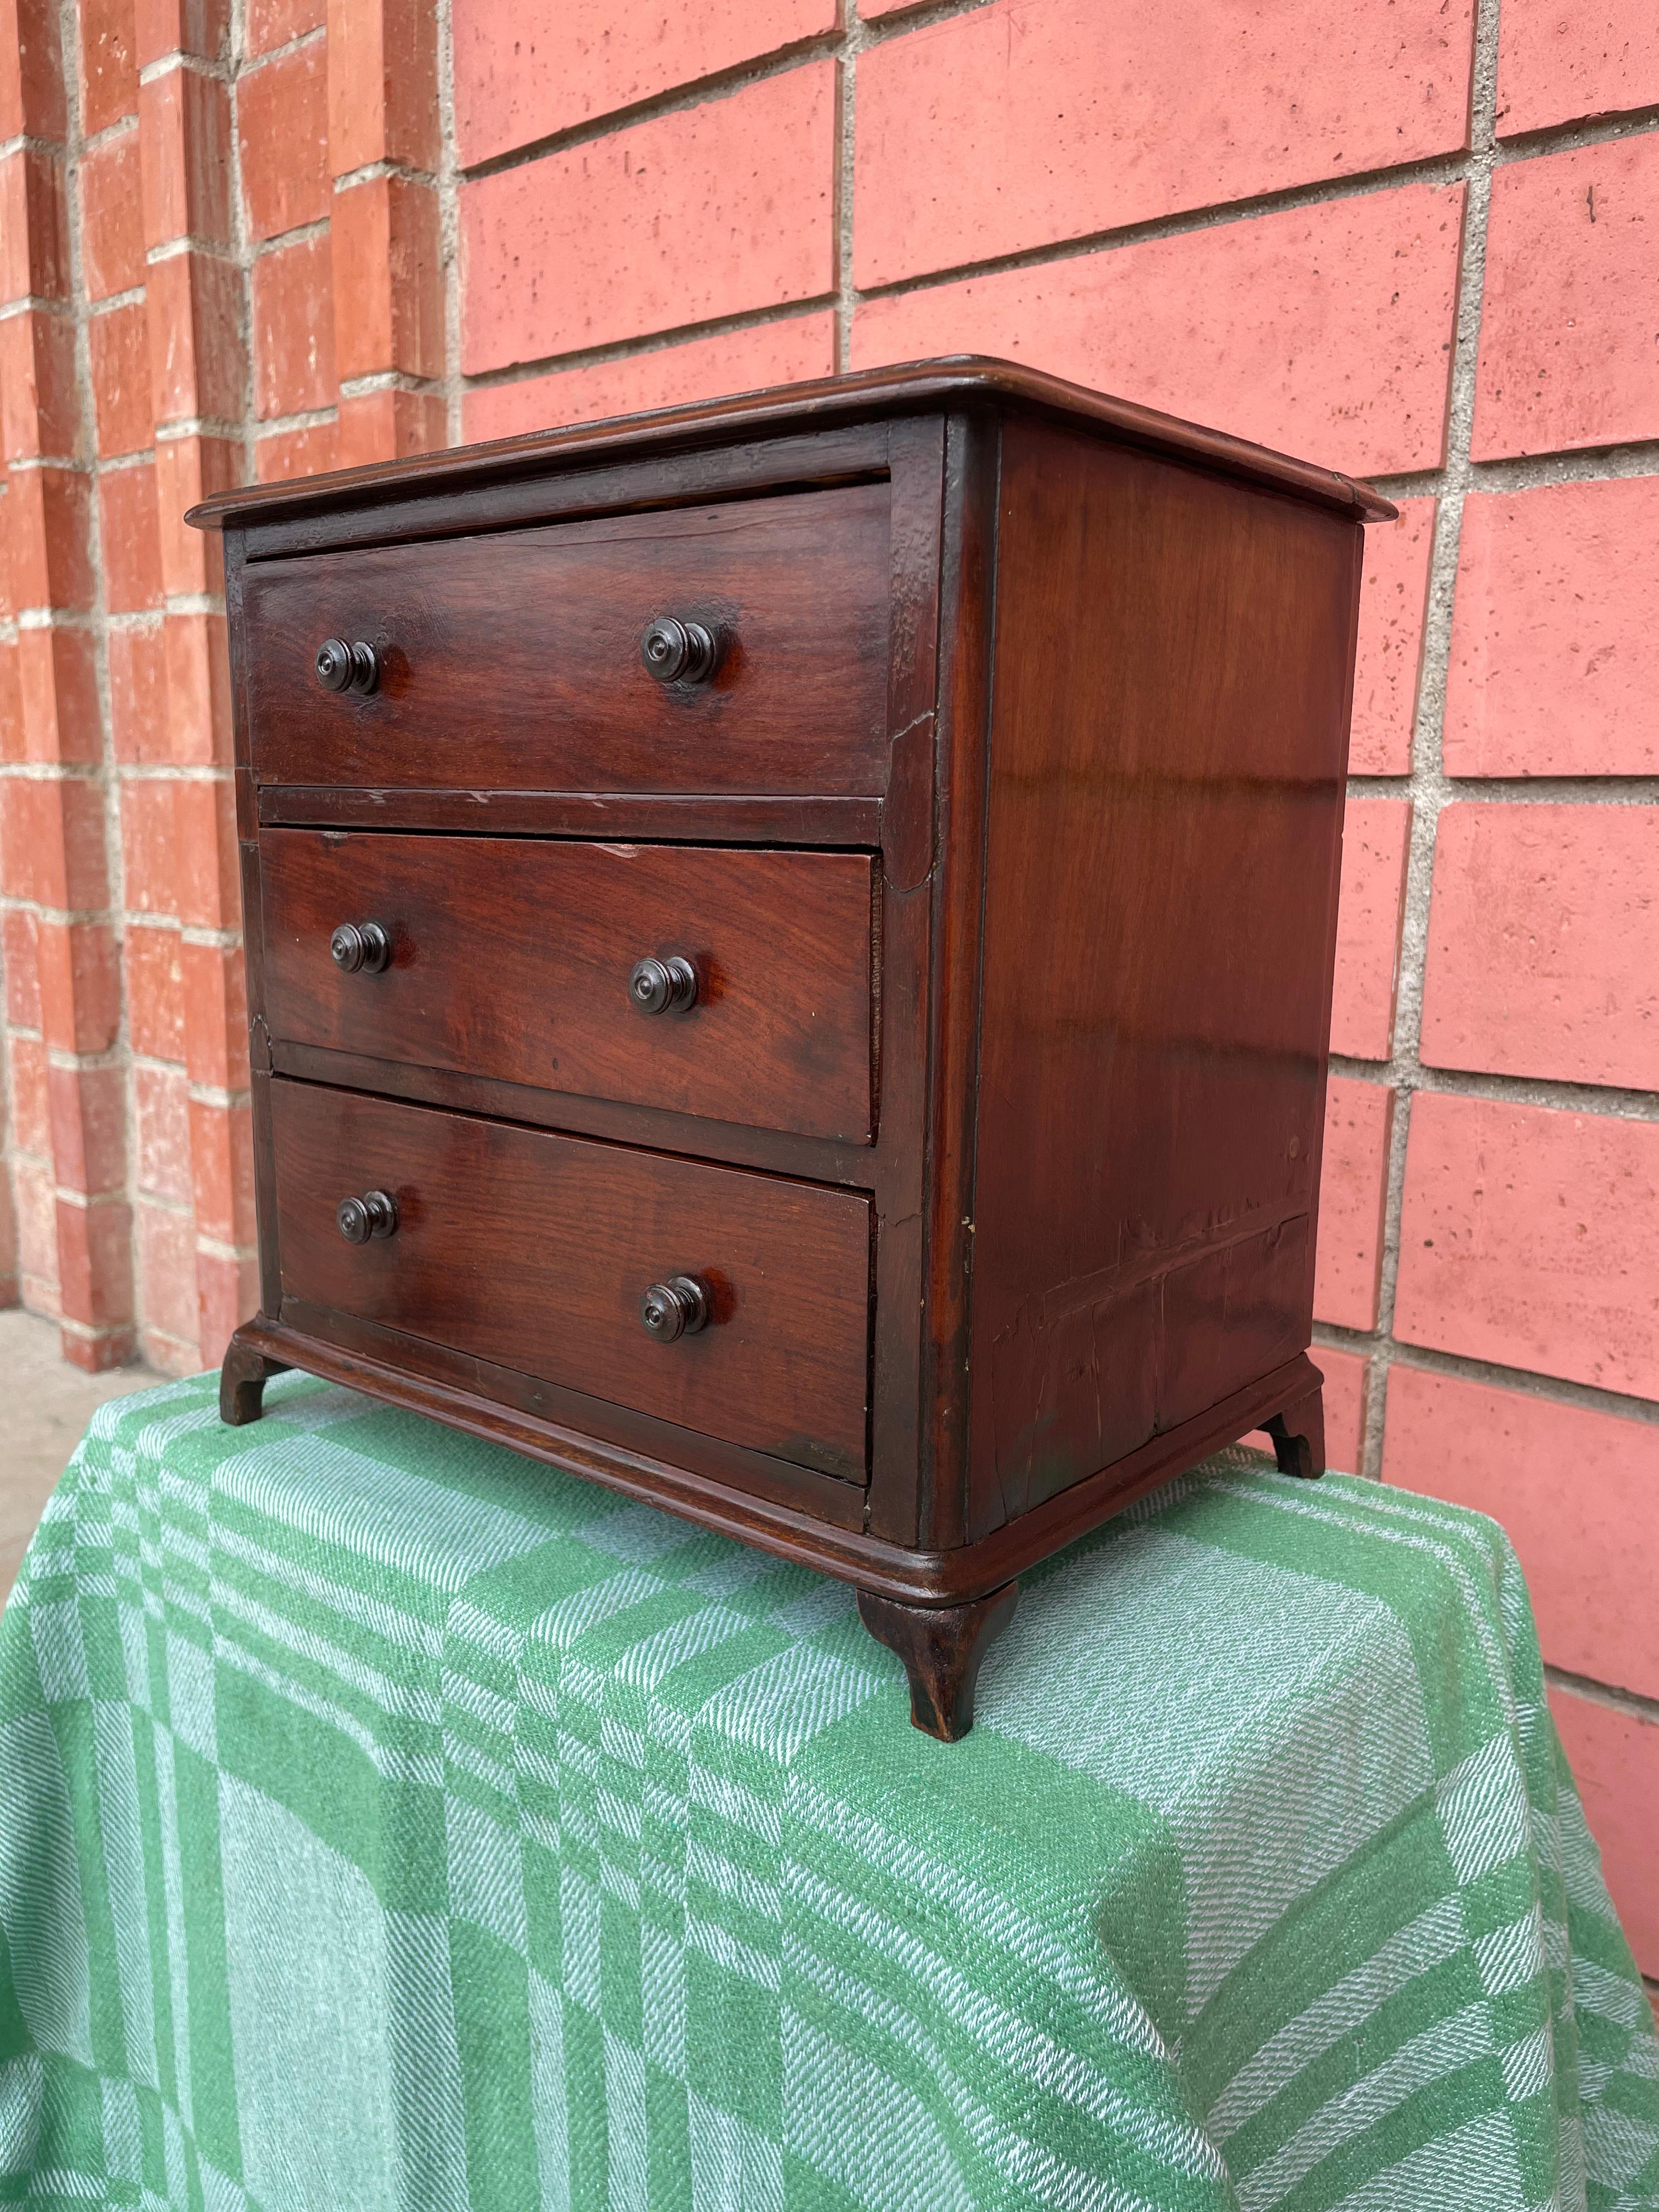 This early 19th century Georgian Miniature Chest of Drawers would have been constructed by the workshop to show potential clients examples of their products. Made from sturdy mahogany wood, raised on small detailed braket feet, and hand